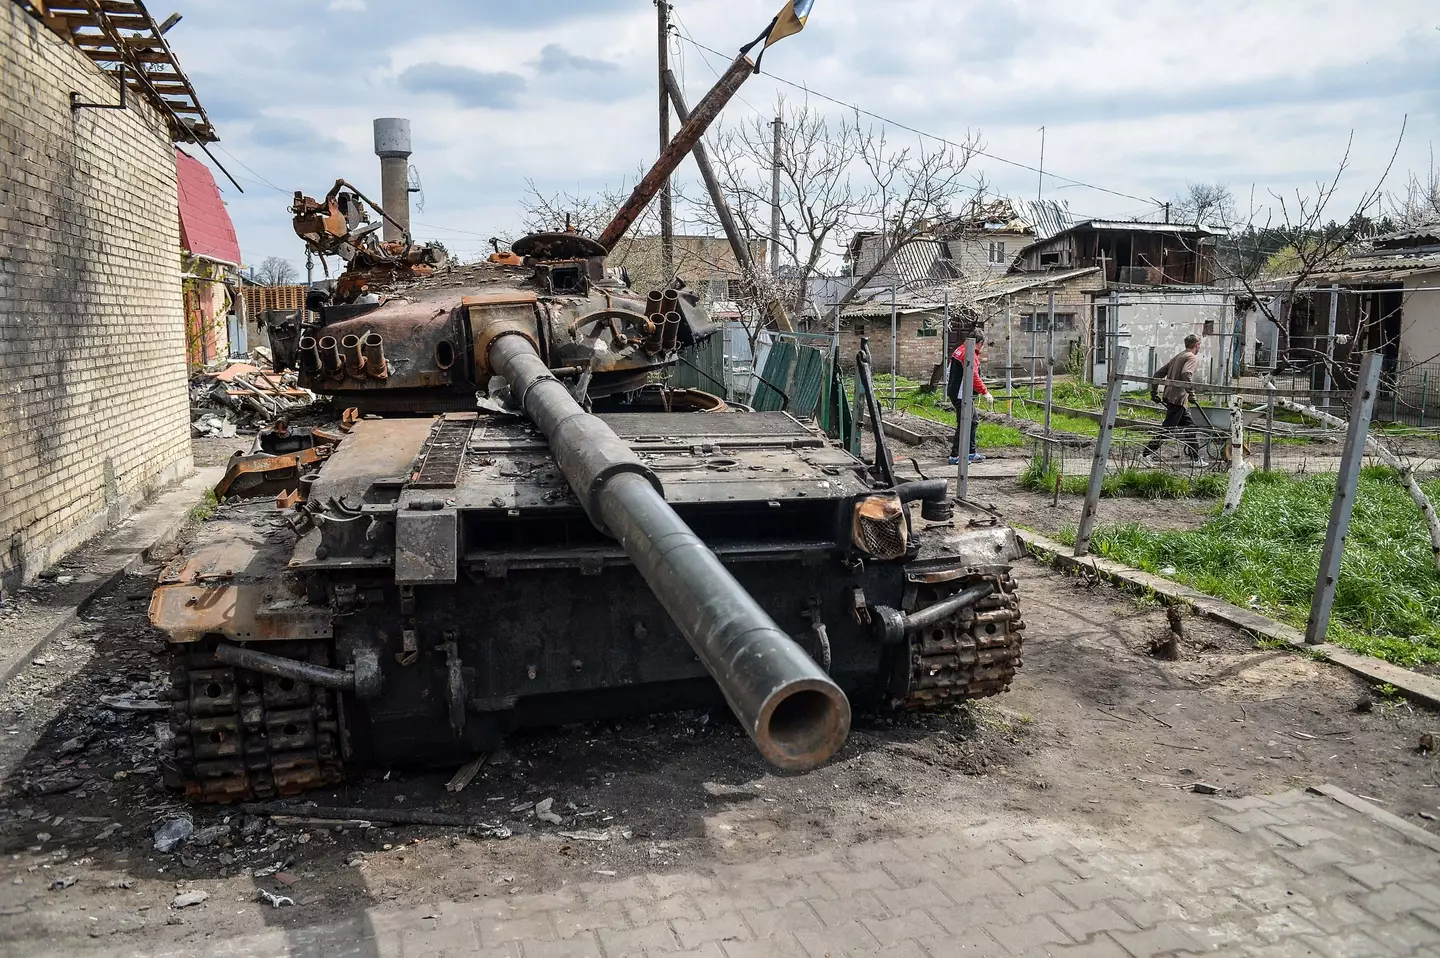 A destroyed Russian tank in the Kyiv Region.